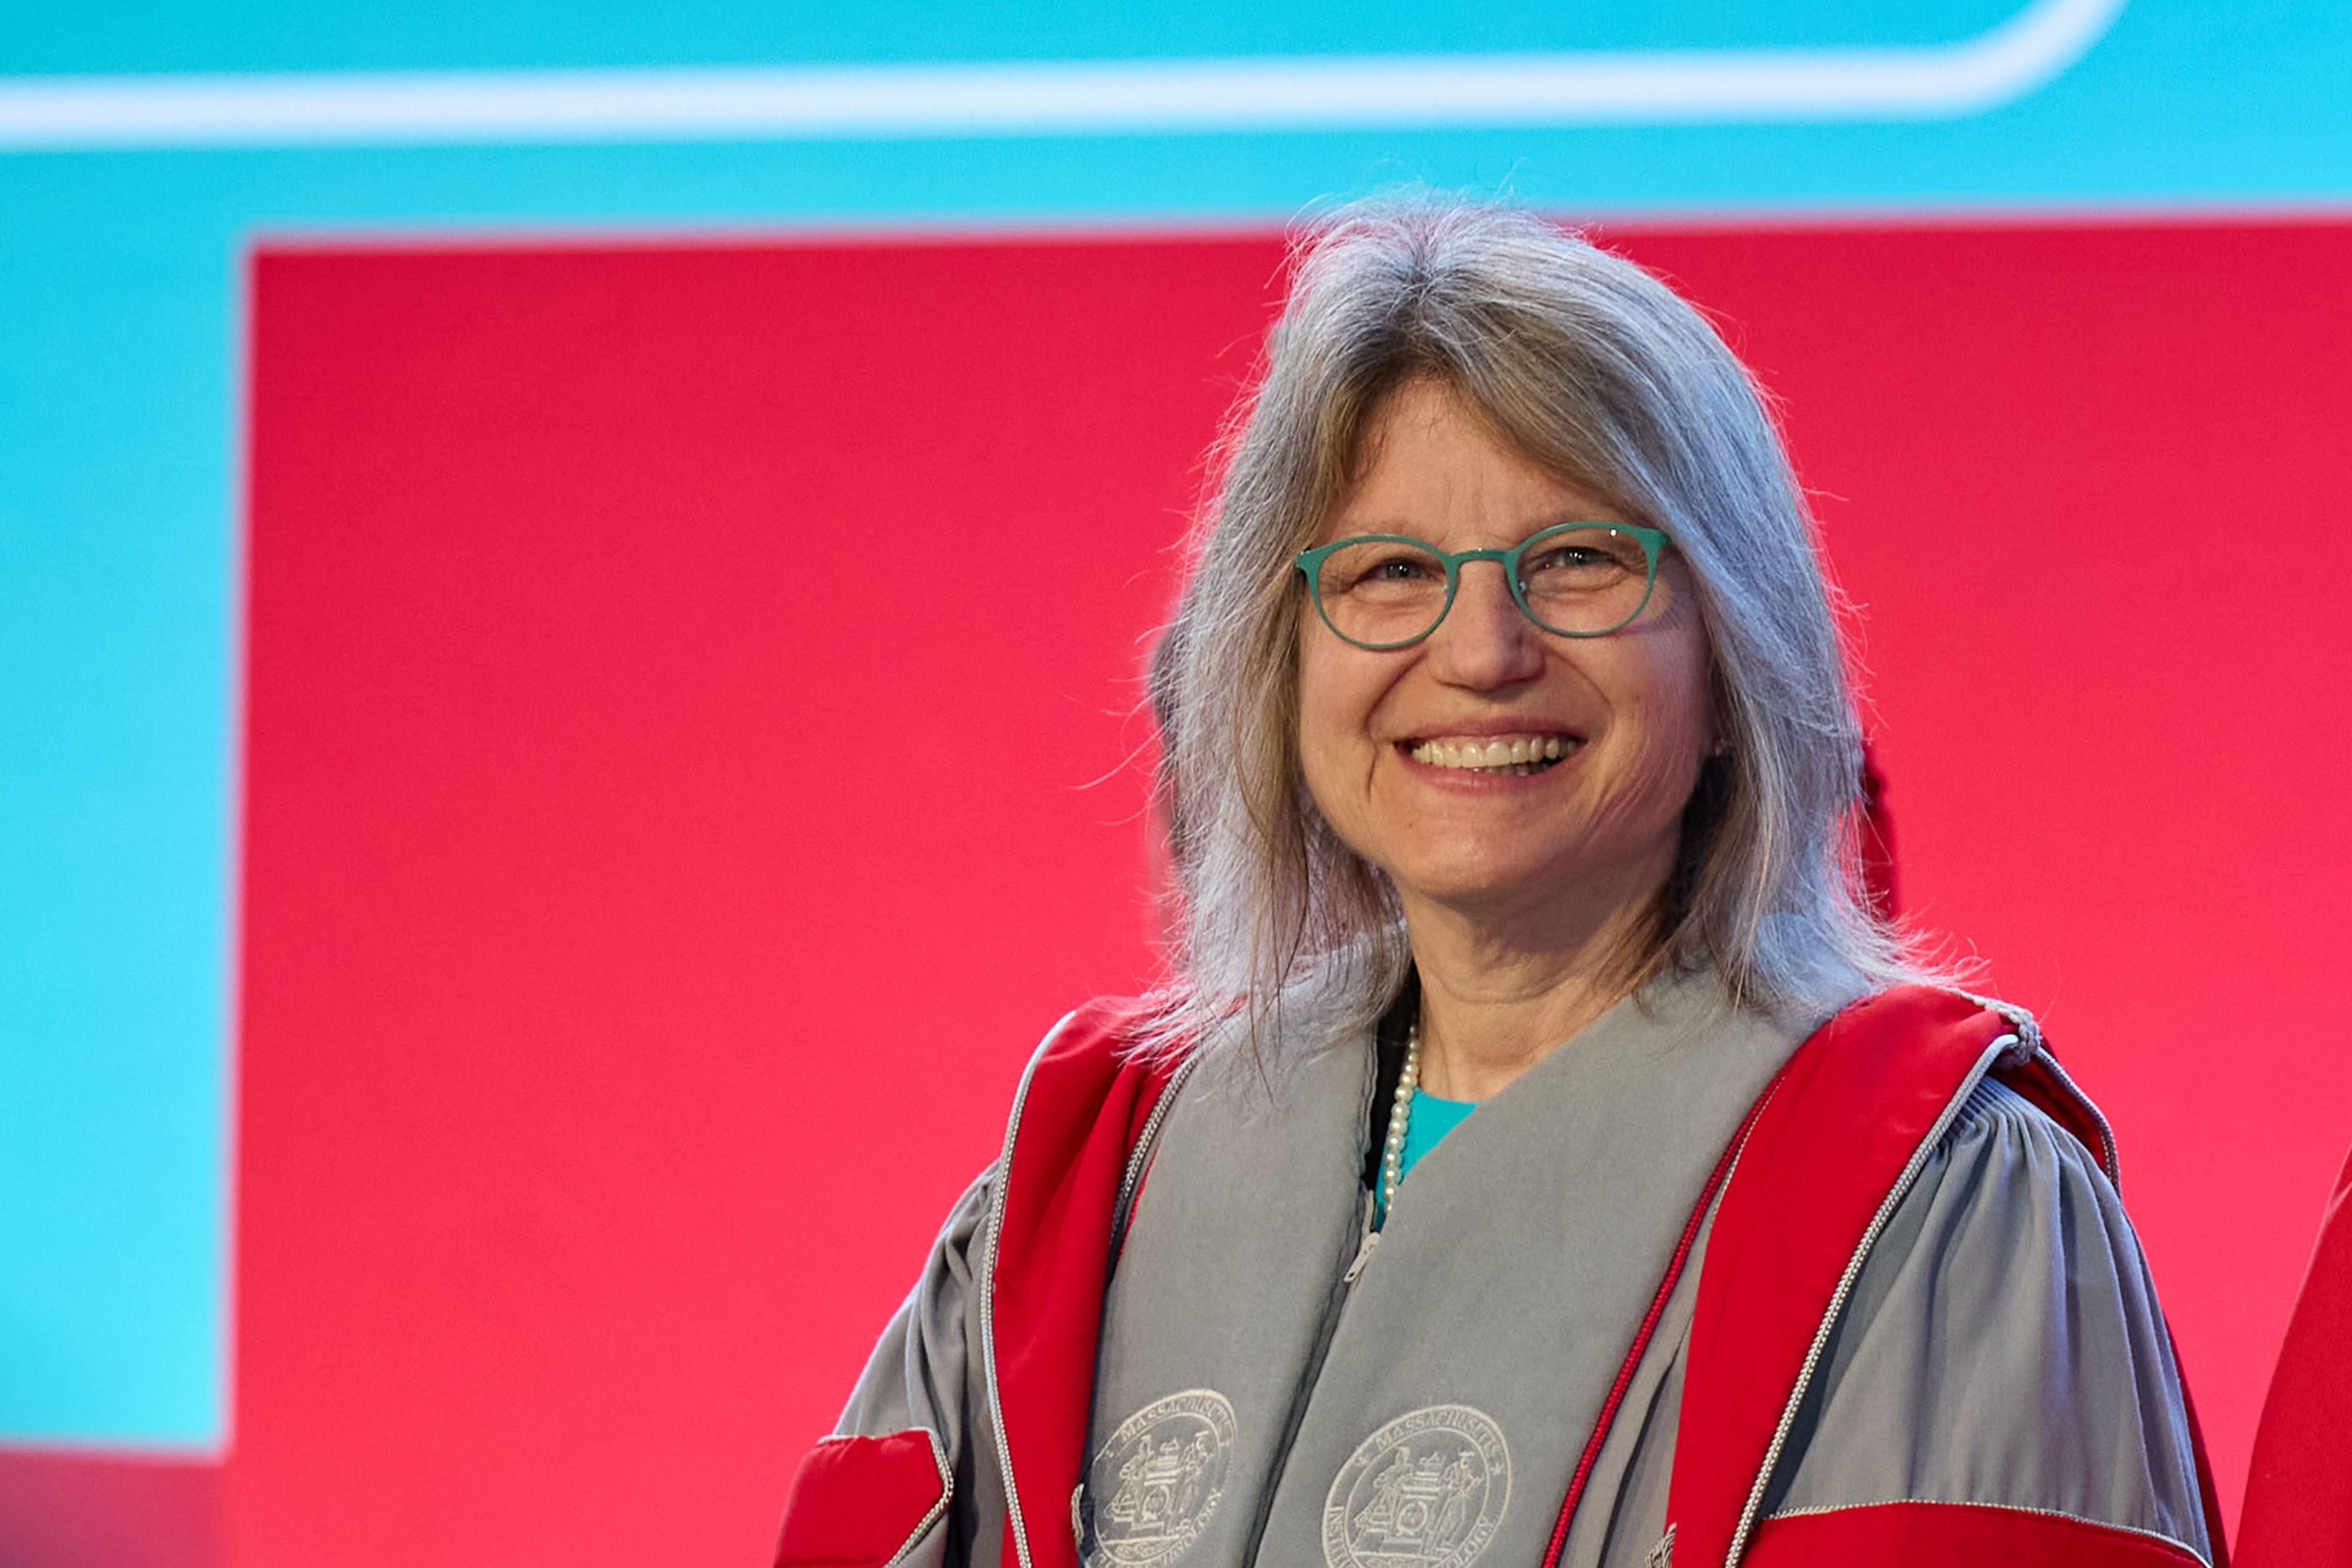 MIT President Sally Kornbluth smiling, in MIT robes, from chest up with red and blue background.